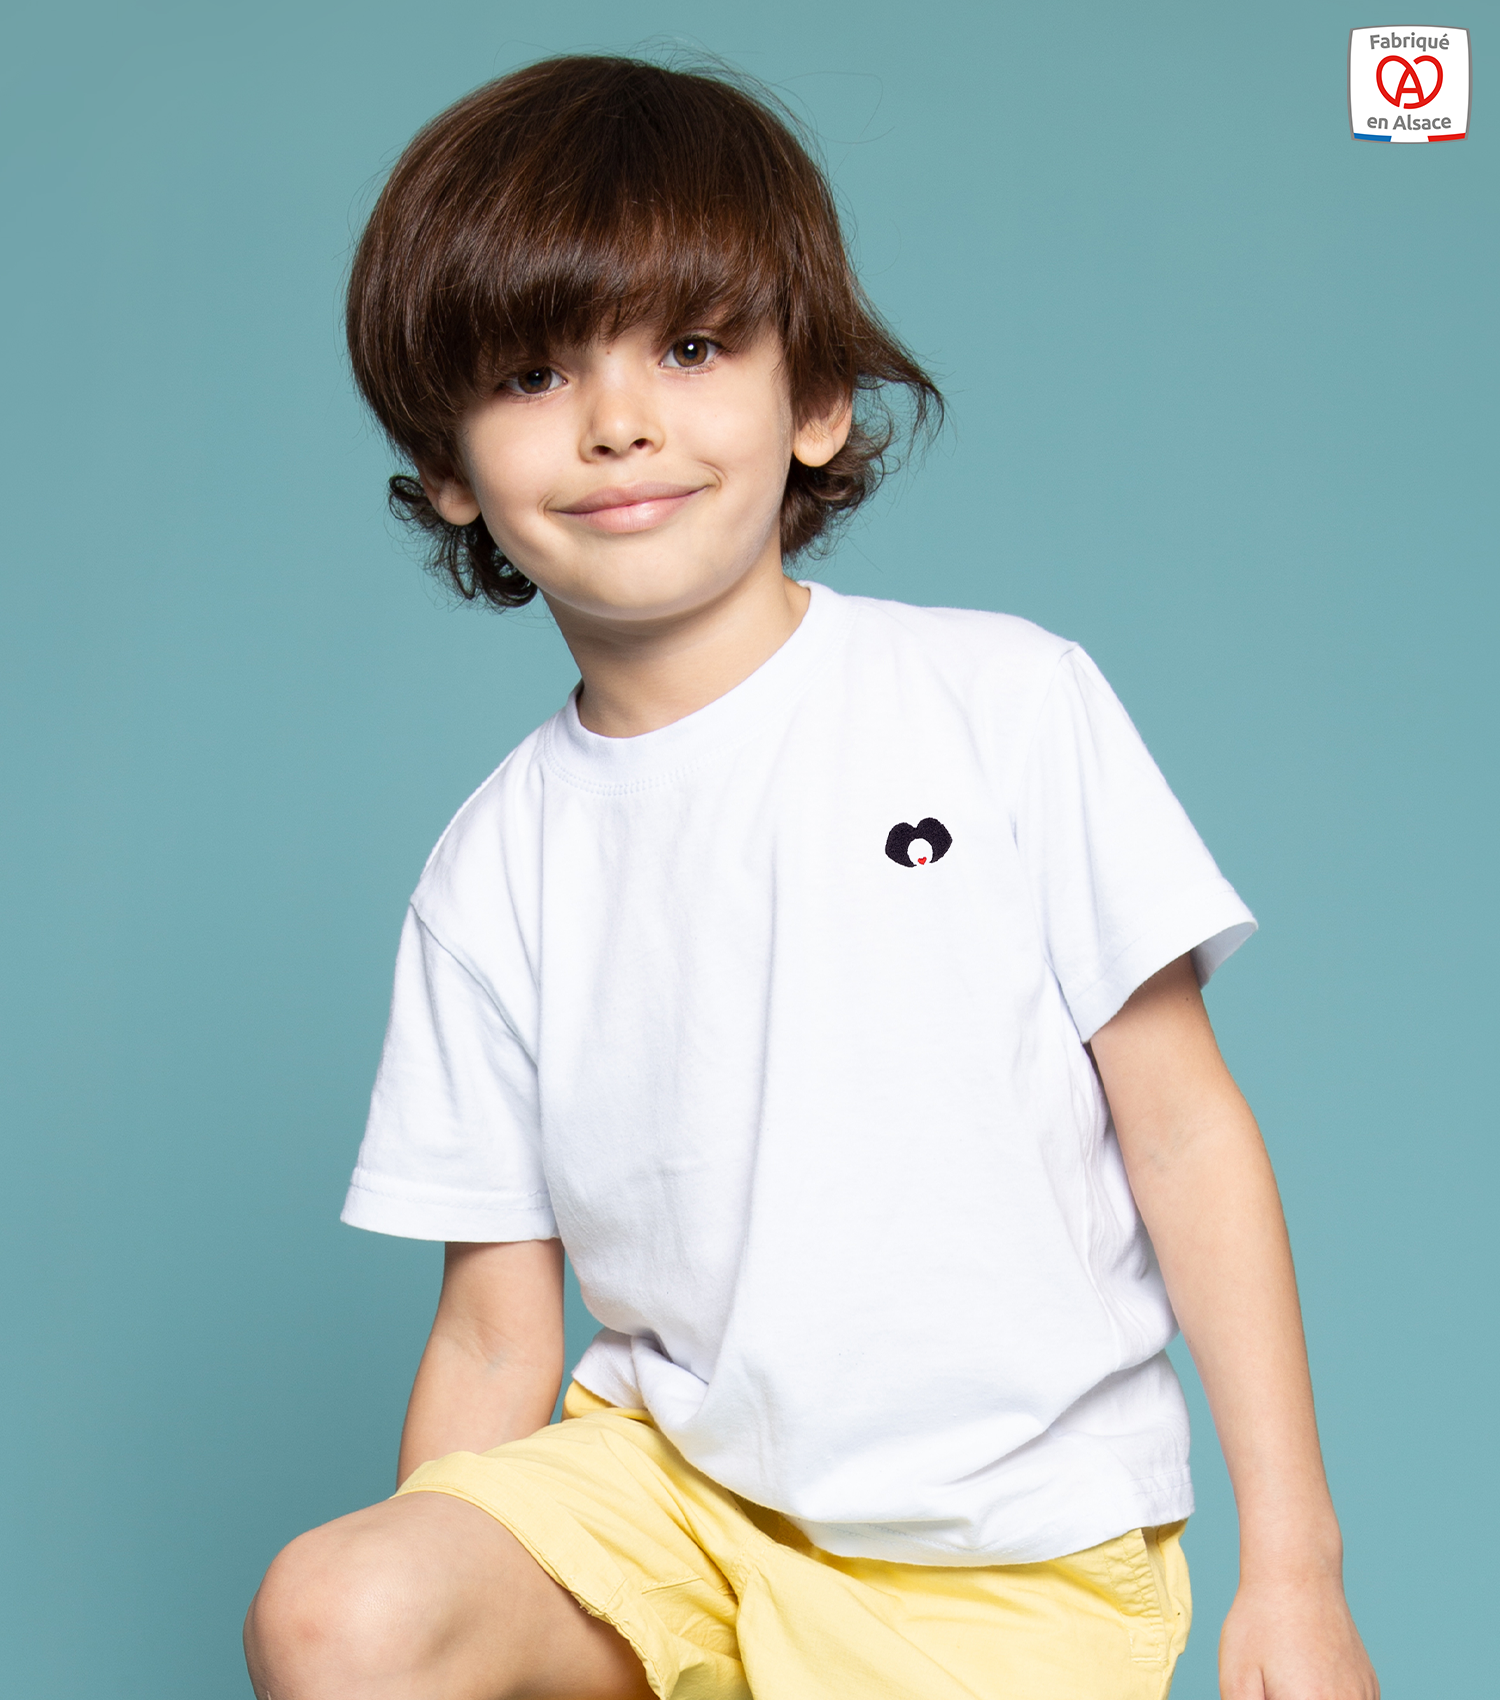 theim-t-shirt-enfant-made-in-france-coiffe-alsacienne-1500x1700px